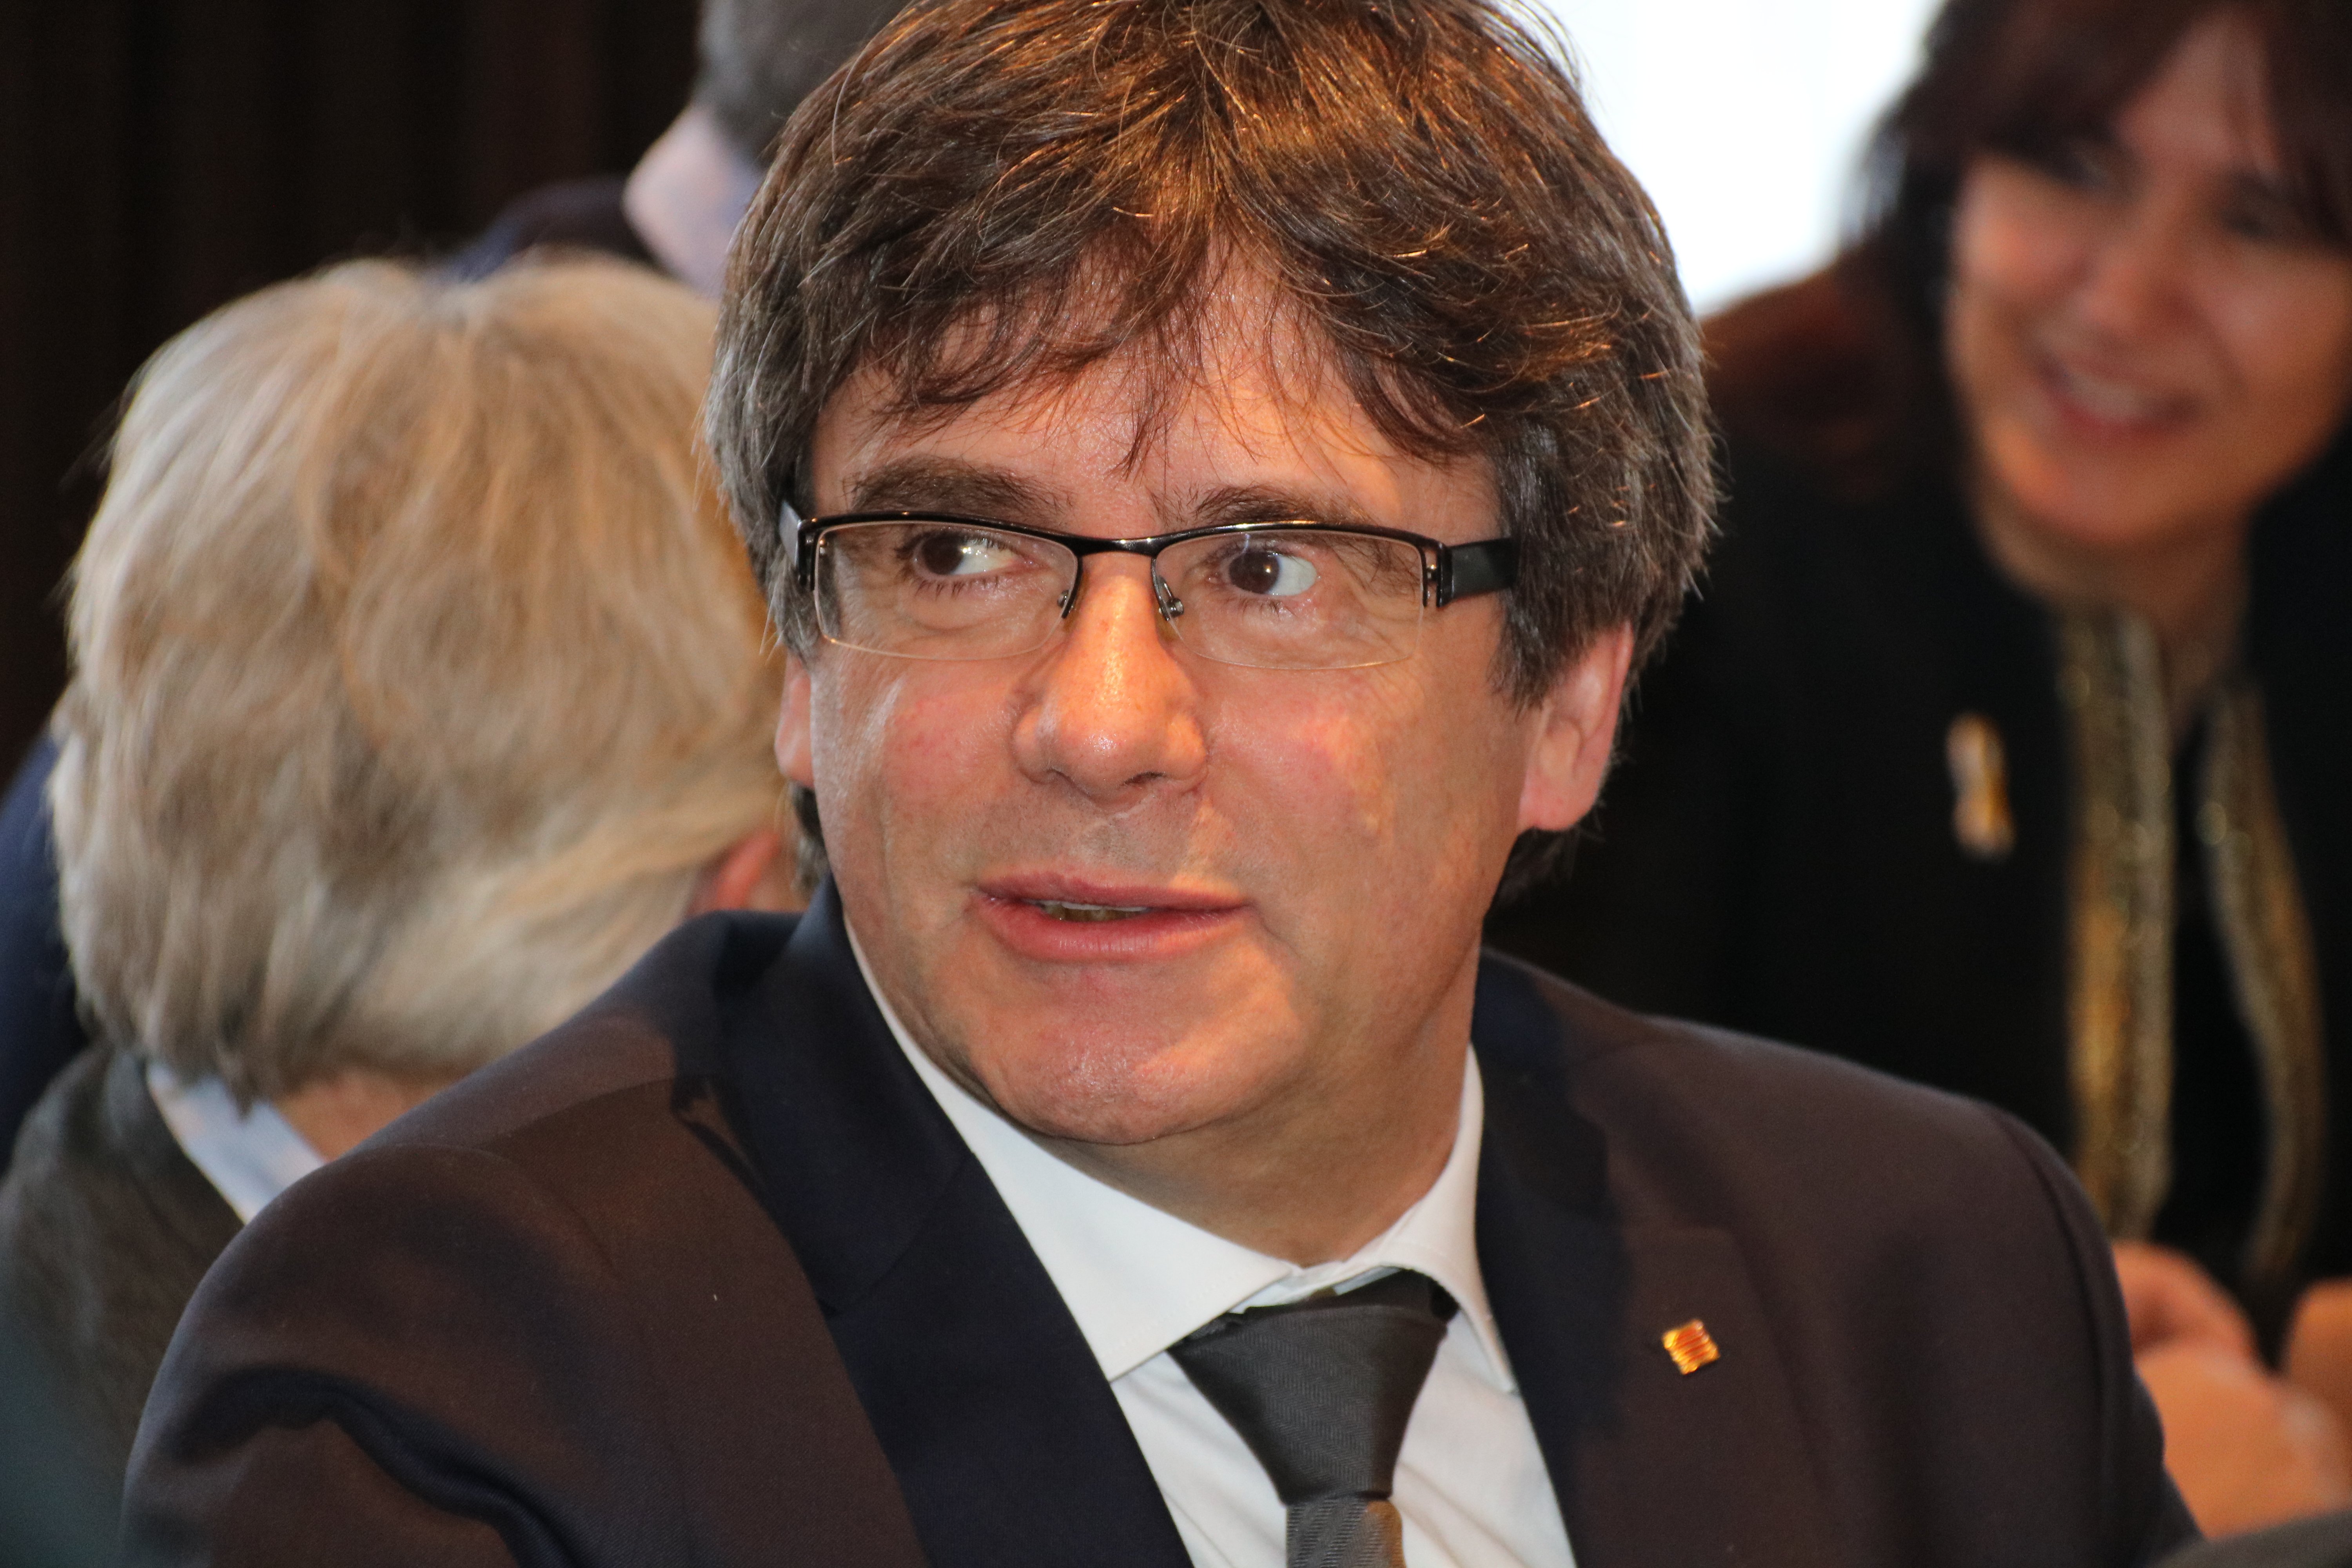 Prosecutors in favour of applying to extradite Puigdemont solely for rebellion